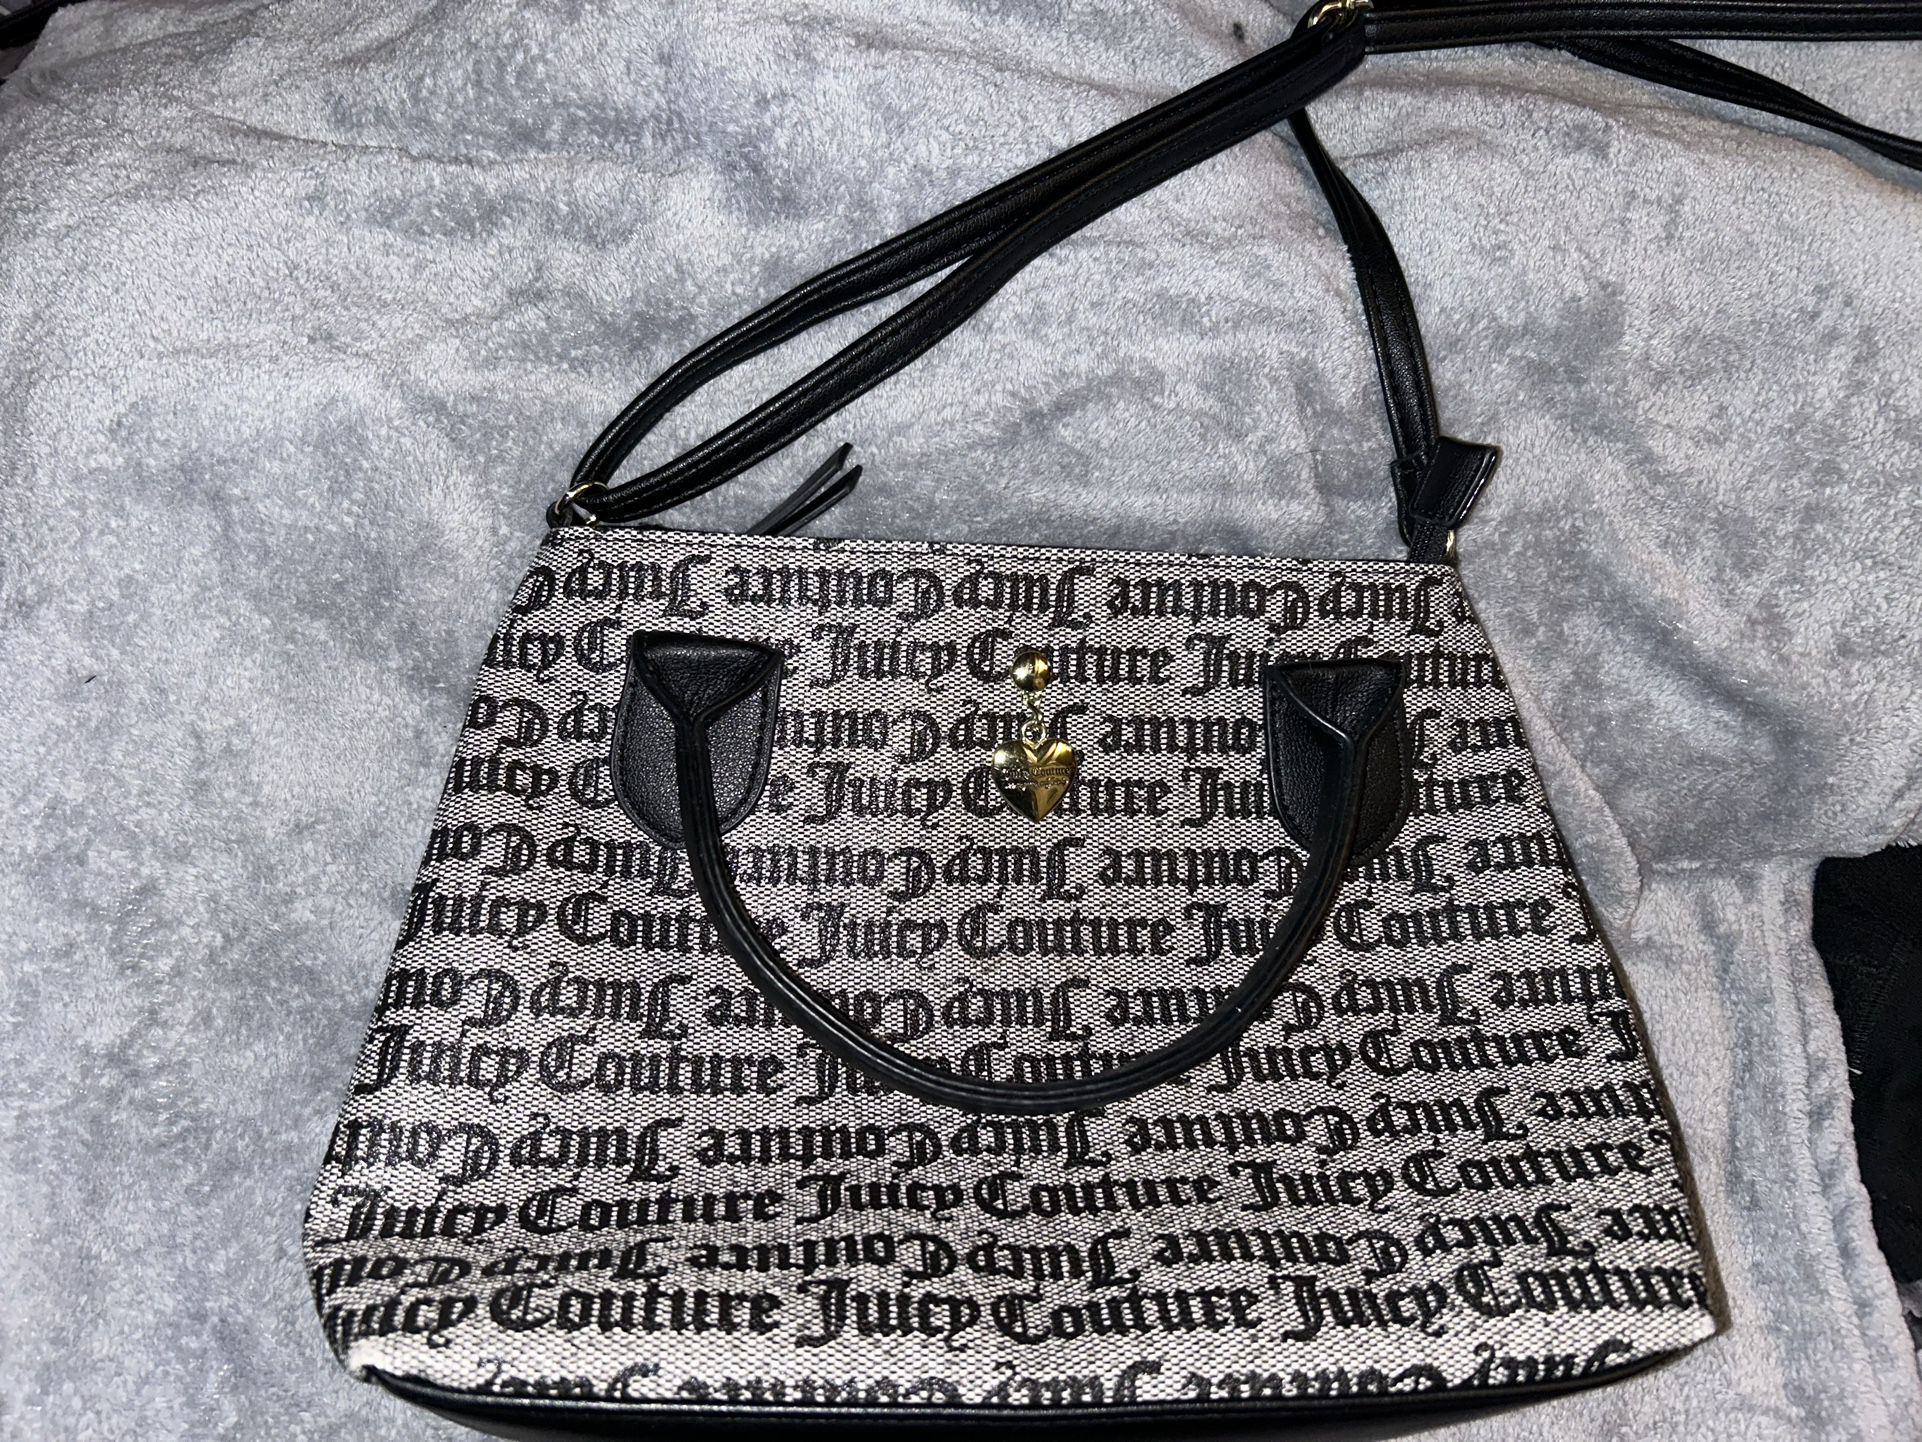 Juicy Couture purse